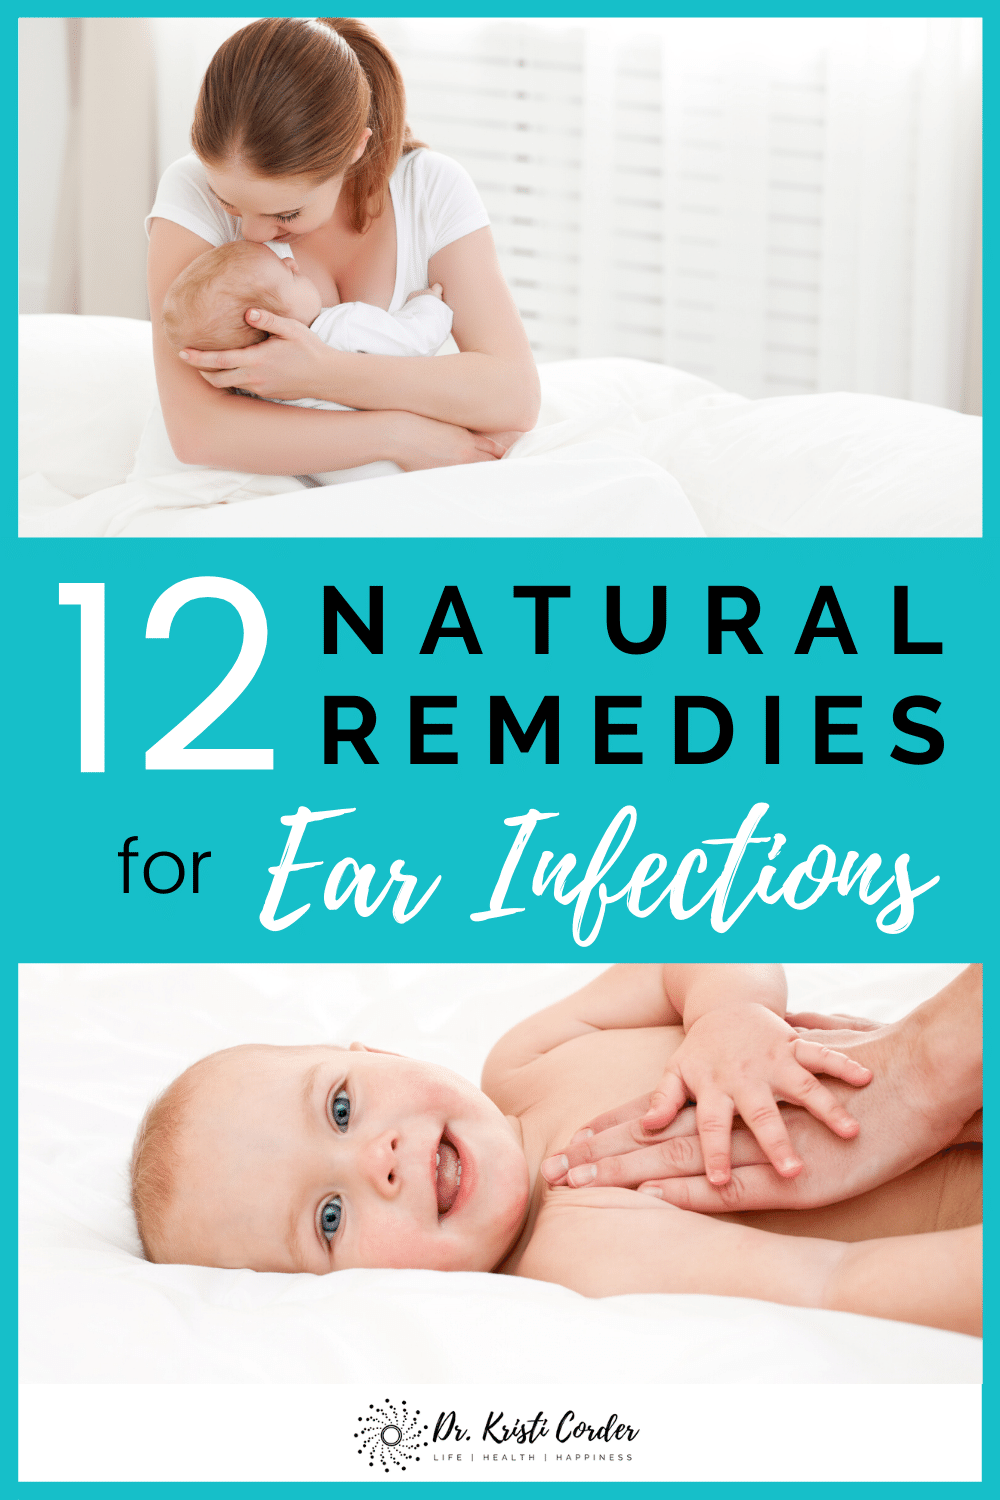 12 Natural Remedies for Ear Infections